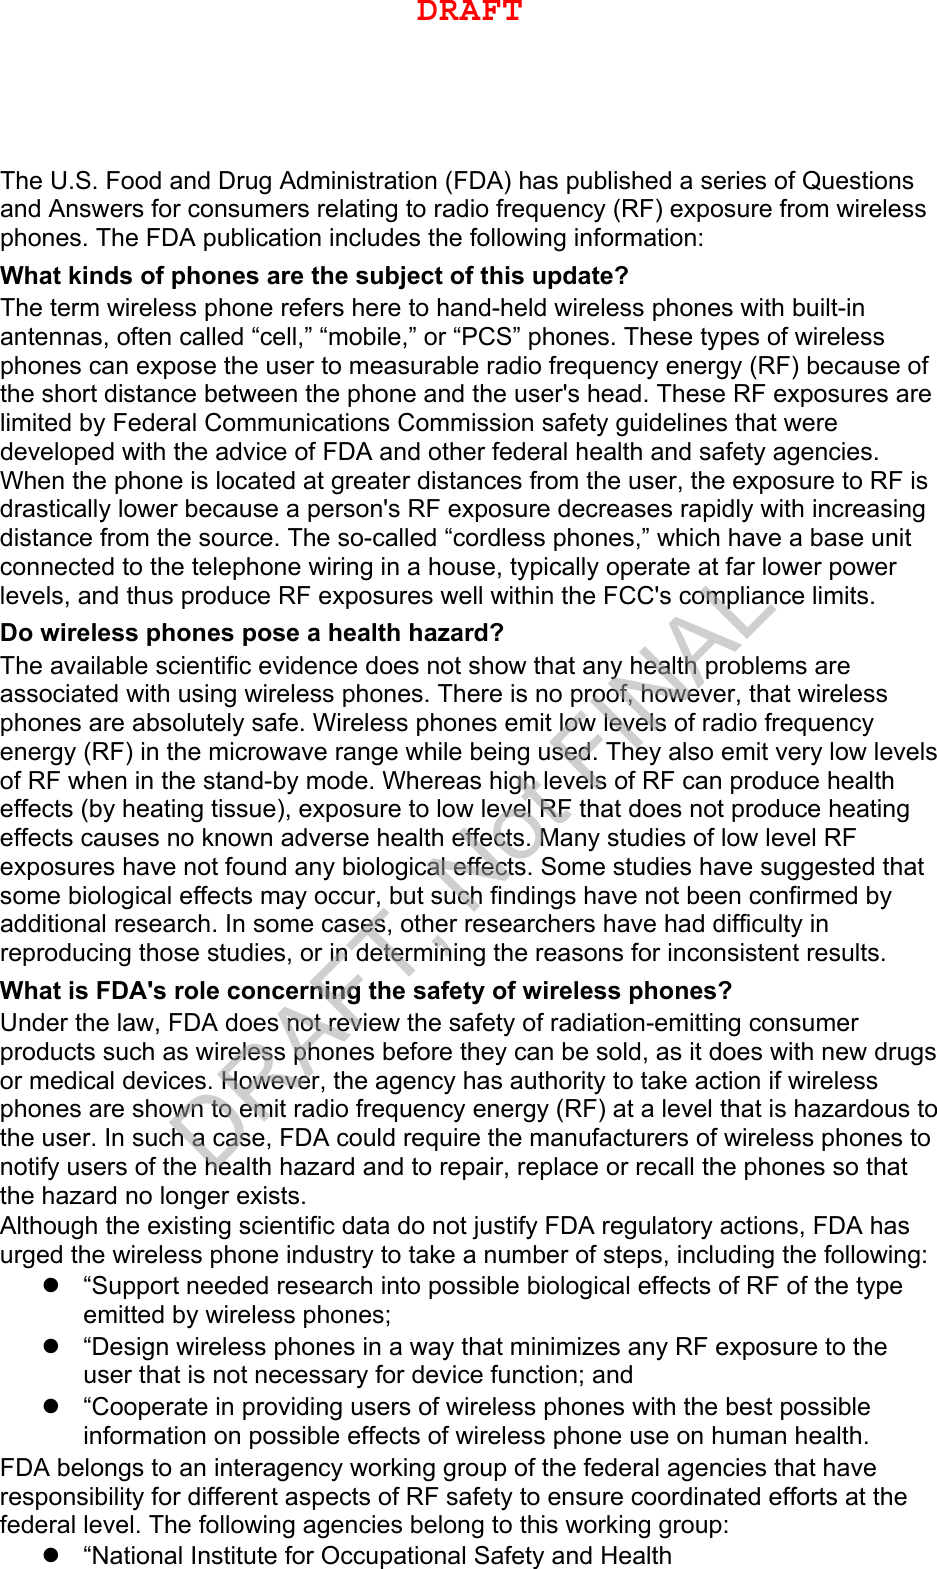 The U.S. Food and Drug Administration (FDA) has published a series of Questions and Answers for consumers relating to radio frequency (RF) exposure from wireless phones. The FDA publication includes the following information: What kinds of phones are the subject of this update? The term wireless phone refers here to hand-held wireless phones with built-in antennas, often called “cell,” “mobile,” or “PCS” phones. These types of wireless phones can expose the user to measurable radio frequency energy (RF) because of the short distance between the phone and the user&apos;s head. These RF exposures are limited by Federal Communications Commission safety guidelines that were developed with the advice of FDA and other federal health and safety agencies. When the phone is located at greater distances from the user, the exposure to RF is drastically lower because a person&apos;s RF exposure decreases rapidly with increasing distance from the source. The so-called “cordless phones,” which have a base unit connected to the telephone wiring in a house, typically operate at far lower power levels, and thus produce RF exposures well within the FCC&apos;s compliance limits. Do wireless phones pose a health hazard? The available scientific evidence does not show that any health problems are associated with using wireless phones. There is no proof, however, that wireless phones are absolutely safe. Wireless phones emit low levels of radio frequency energy (RF) in the microwave range while being used. They also emit very low levels of RF when in the stand-by mode. Whereas high levels of RF can produce health effects (by heating tissue), exposure to low level RF that does not produce heating effects causes no known adverse health effects. Many studies of low level RF exposures have not found any biological effects. Some studies have suggested that some biological effects may occur, but such findings have not been confirmed by additional research. In some cases, other researchers have had difficulty in reproducing those studies, or in determining the reasons for inconsistent results. What is FDA&apos;s role concerning the safety of wireless phones? Under the law, FDA does not review the safety of radiation-emitting consumer products such as wireless phones before they can be sold, as it does with new drugs or medical devices. However, the agency has authority to take action if wireless phones are shown to emit radio frequency energy (RF) at a level that is hazardous to the user. In such a case, FDA could require the manufacturers of wireless phones to notify users of the health hazard and to repair, replace or recall the phones so that the hazard no longer exists. Although the existing scientific data do not justify FDA regulatory actions, FDA has urged the wireless phone industry to take a number of steps, including the following: “Support needed research into possible biological effects of RF of the typeemitted by wireless phones;“Design wireless phones in a way that minimizes any RF exposure to theuser that is not necessary for device function; and“Cooperate in providing users of wireless phones with the best possibleinformation on possible effects of wireless phone use on human health.FDA belongs to an interagency working group of the federal agencies that have responsibility for different aspects of RF safety to ensure coordinated efforts at the federal level. The following agencies belong to this working group: “National Institute for Occupational Safety and HealthDRAFTDRAFT, Not FINAL